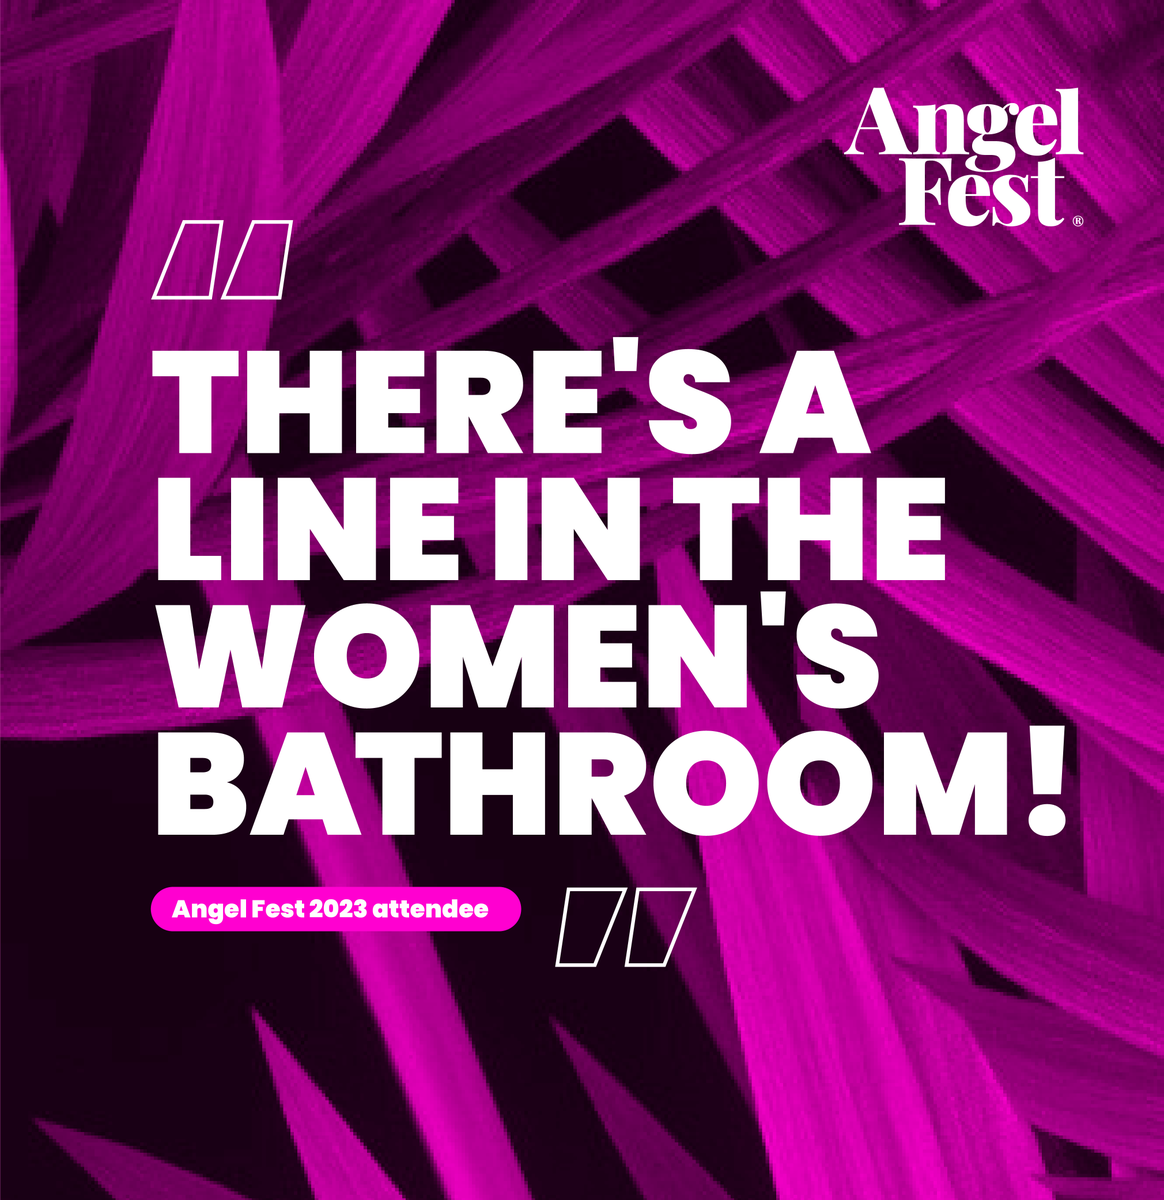 Have you ever heard “There’s a line in the women’s bathroom!” at a venture event? Neither had we until last year’s #AngelFest. #AngelFest2024 is on May 2. Come learn about investing in startups and connect with other investors. hubs.li/Q02qCQtw0